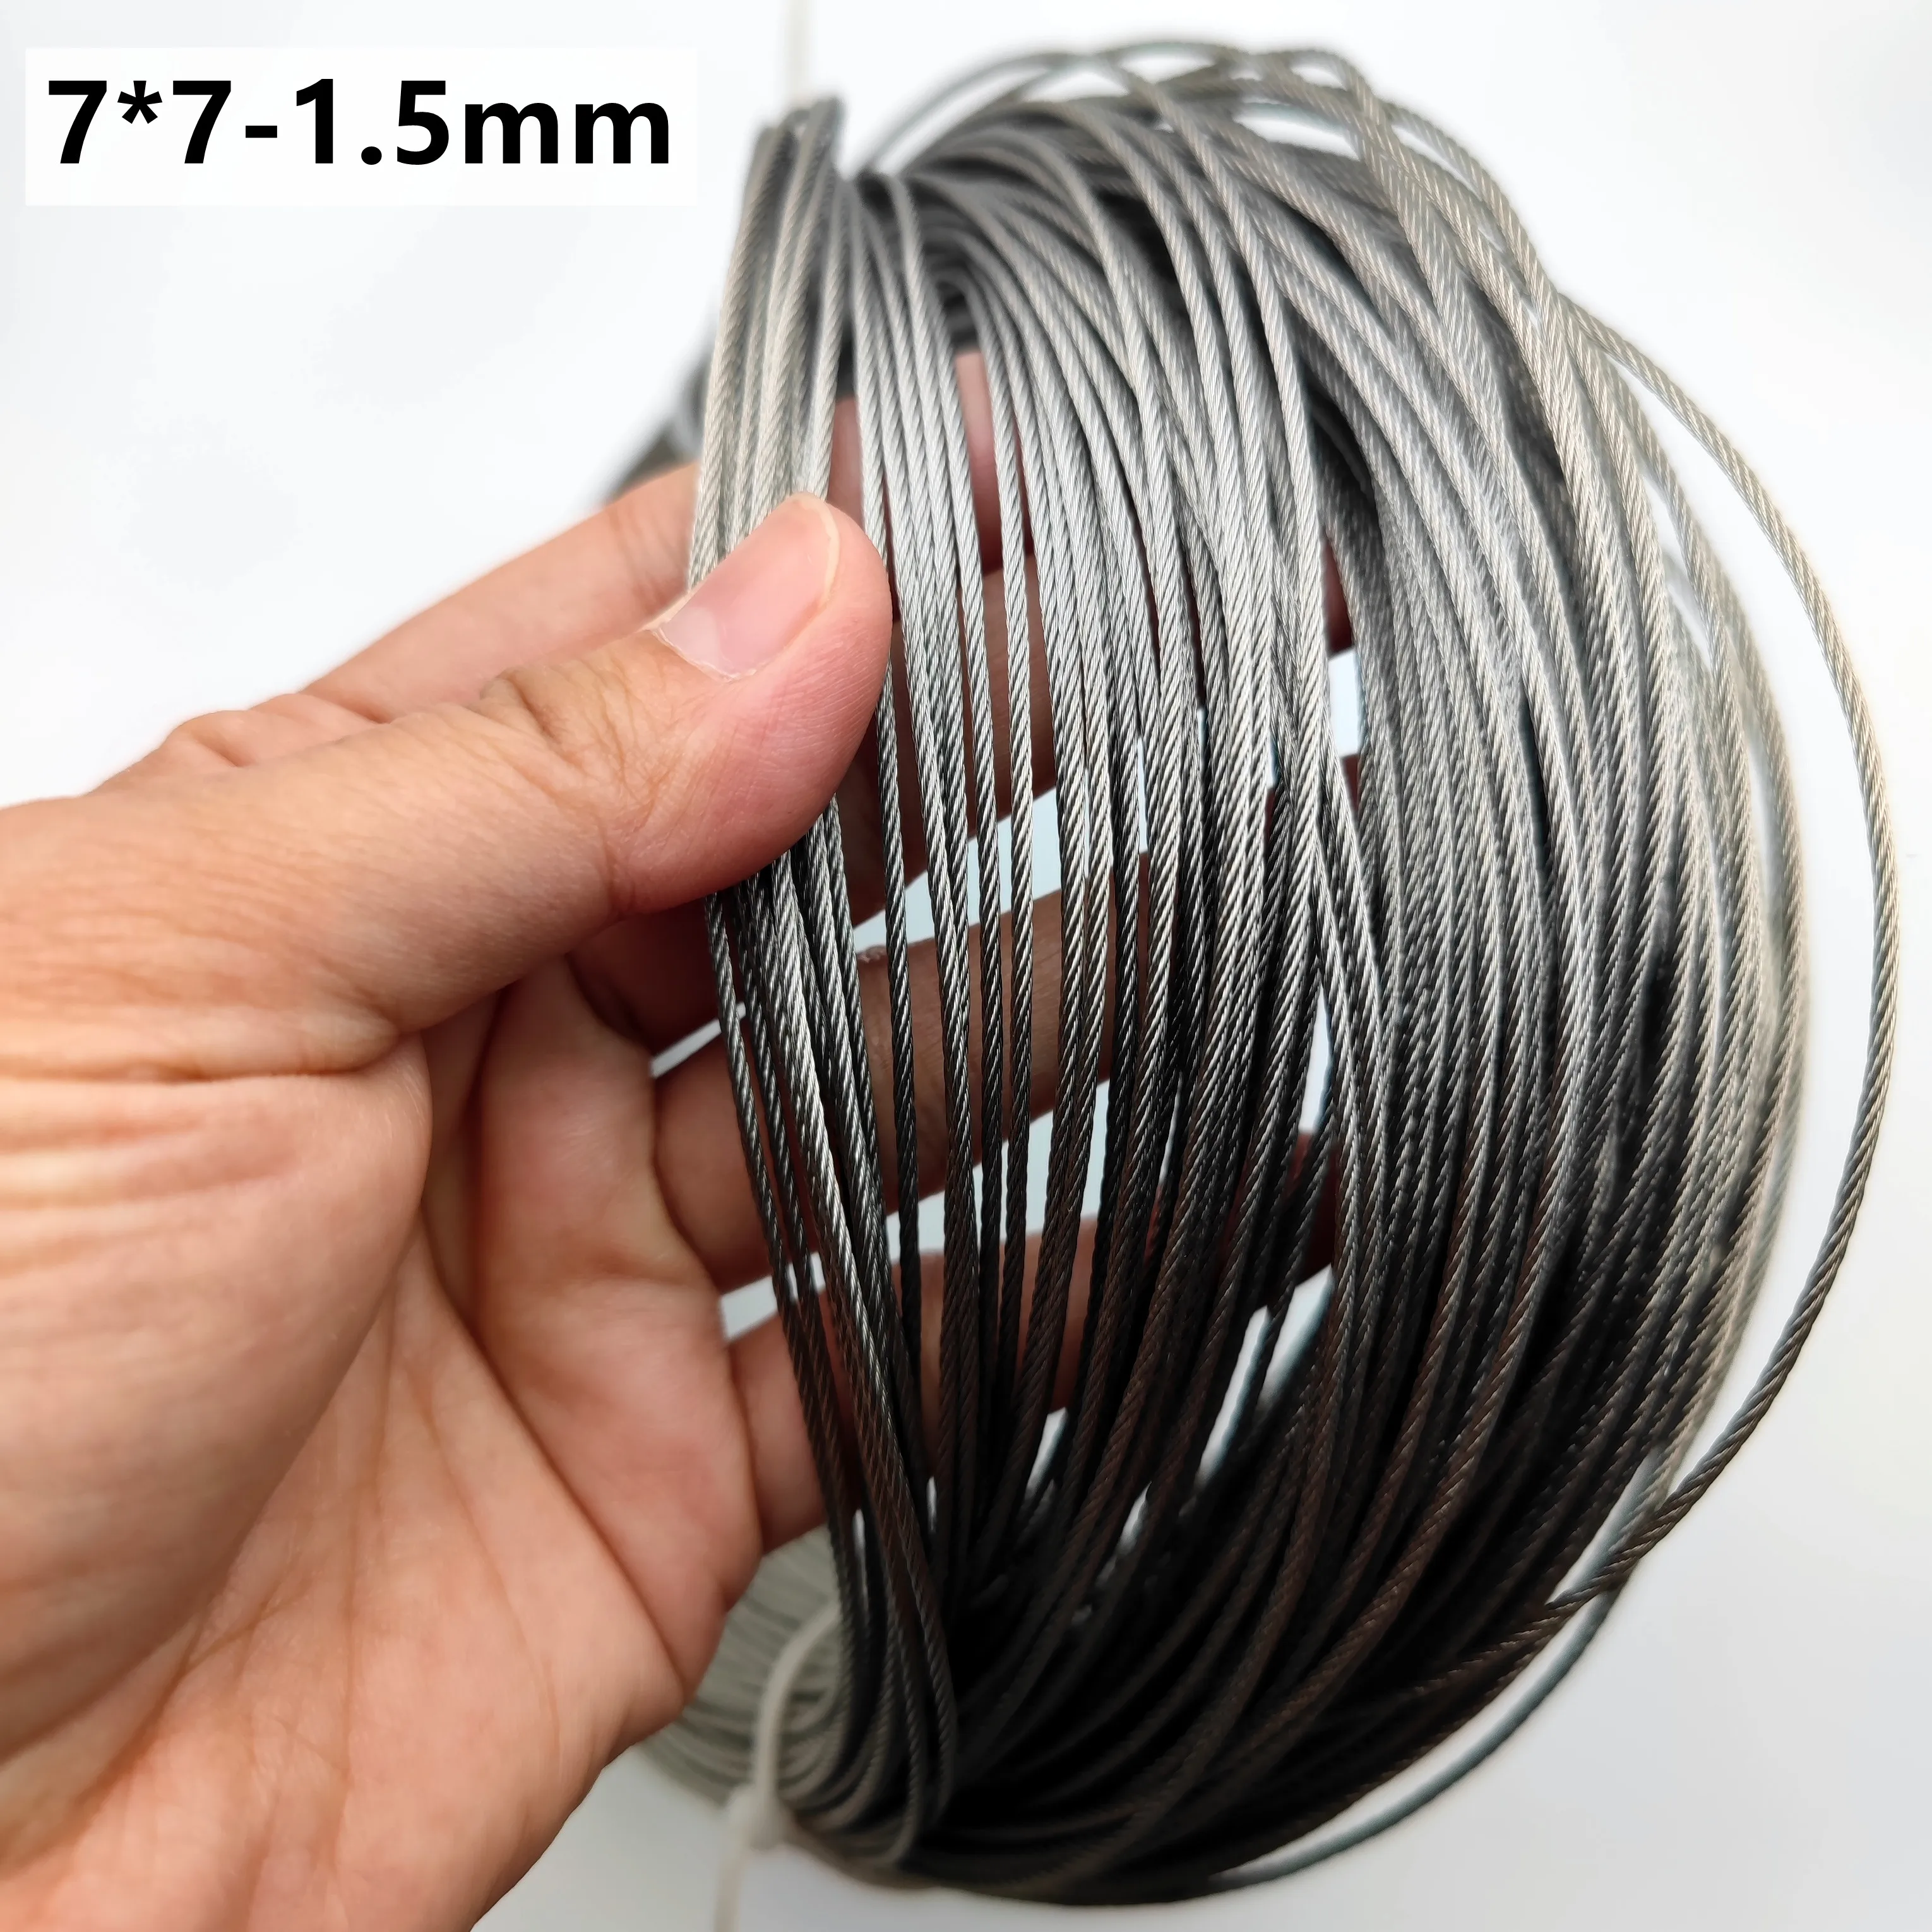 50M/100M/200M 1.5mm Diameter 7X7 Construction 304 Stainless steel Wire rope Alambre Softer Fishing Lifting Cable 10m 15m 20m 25m 4mm diameter 7x7 construction 304 stainless steel wire rope alambre softer fishing lifting cable